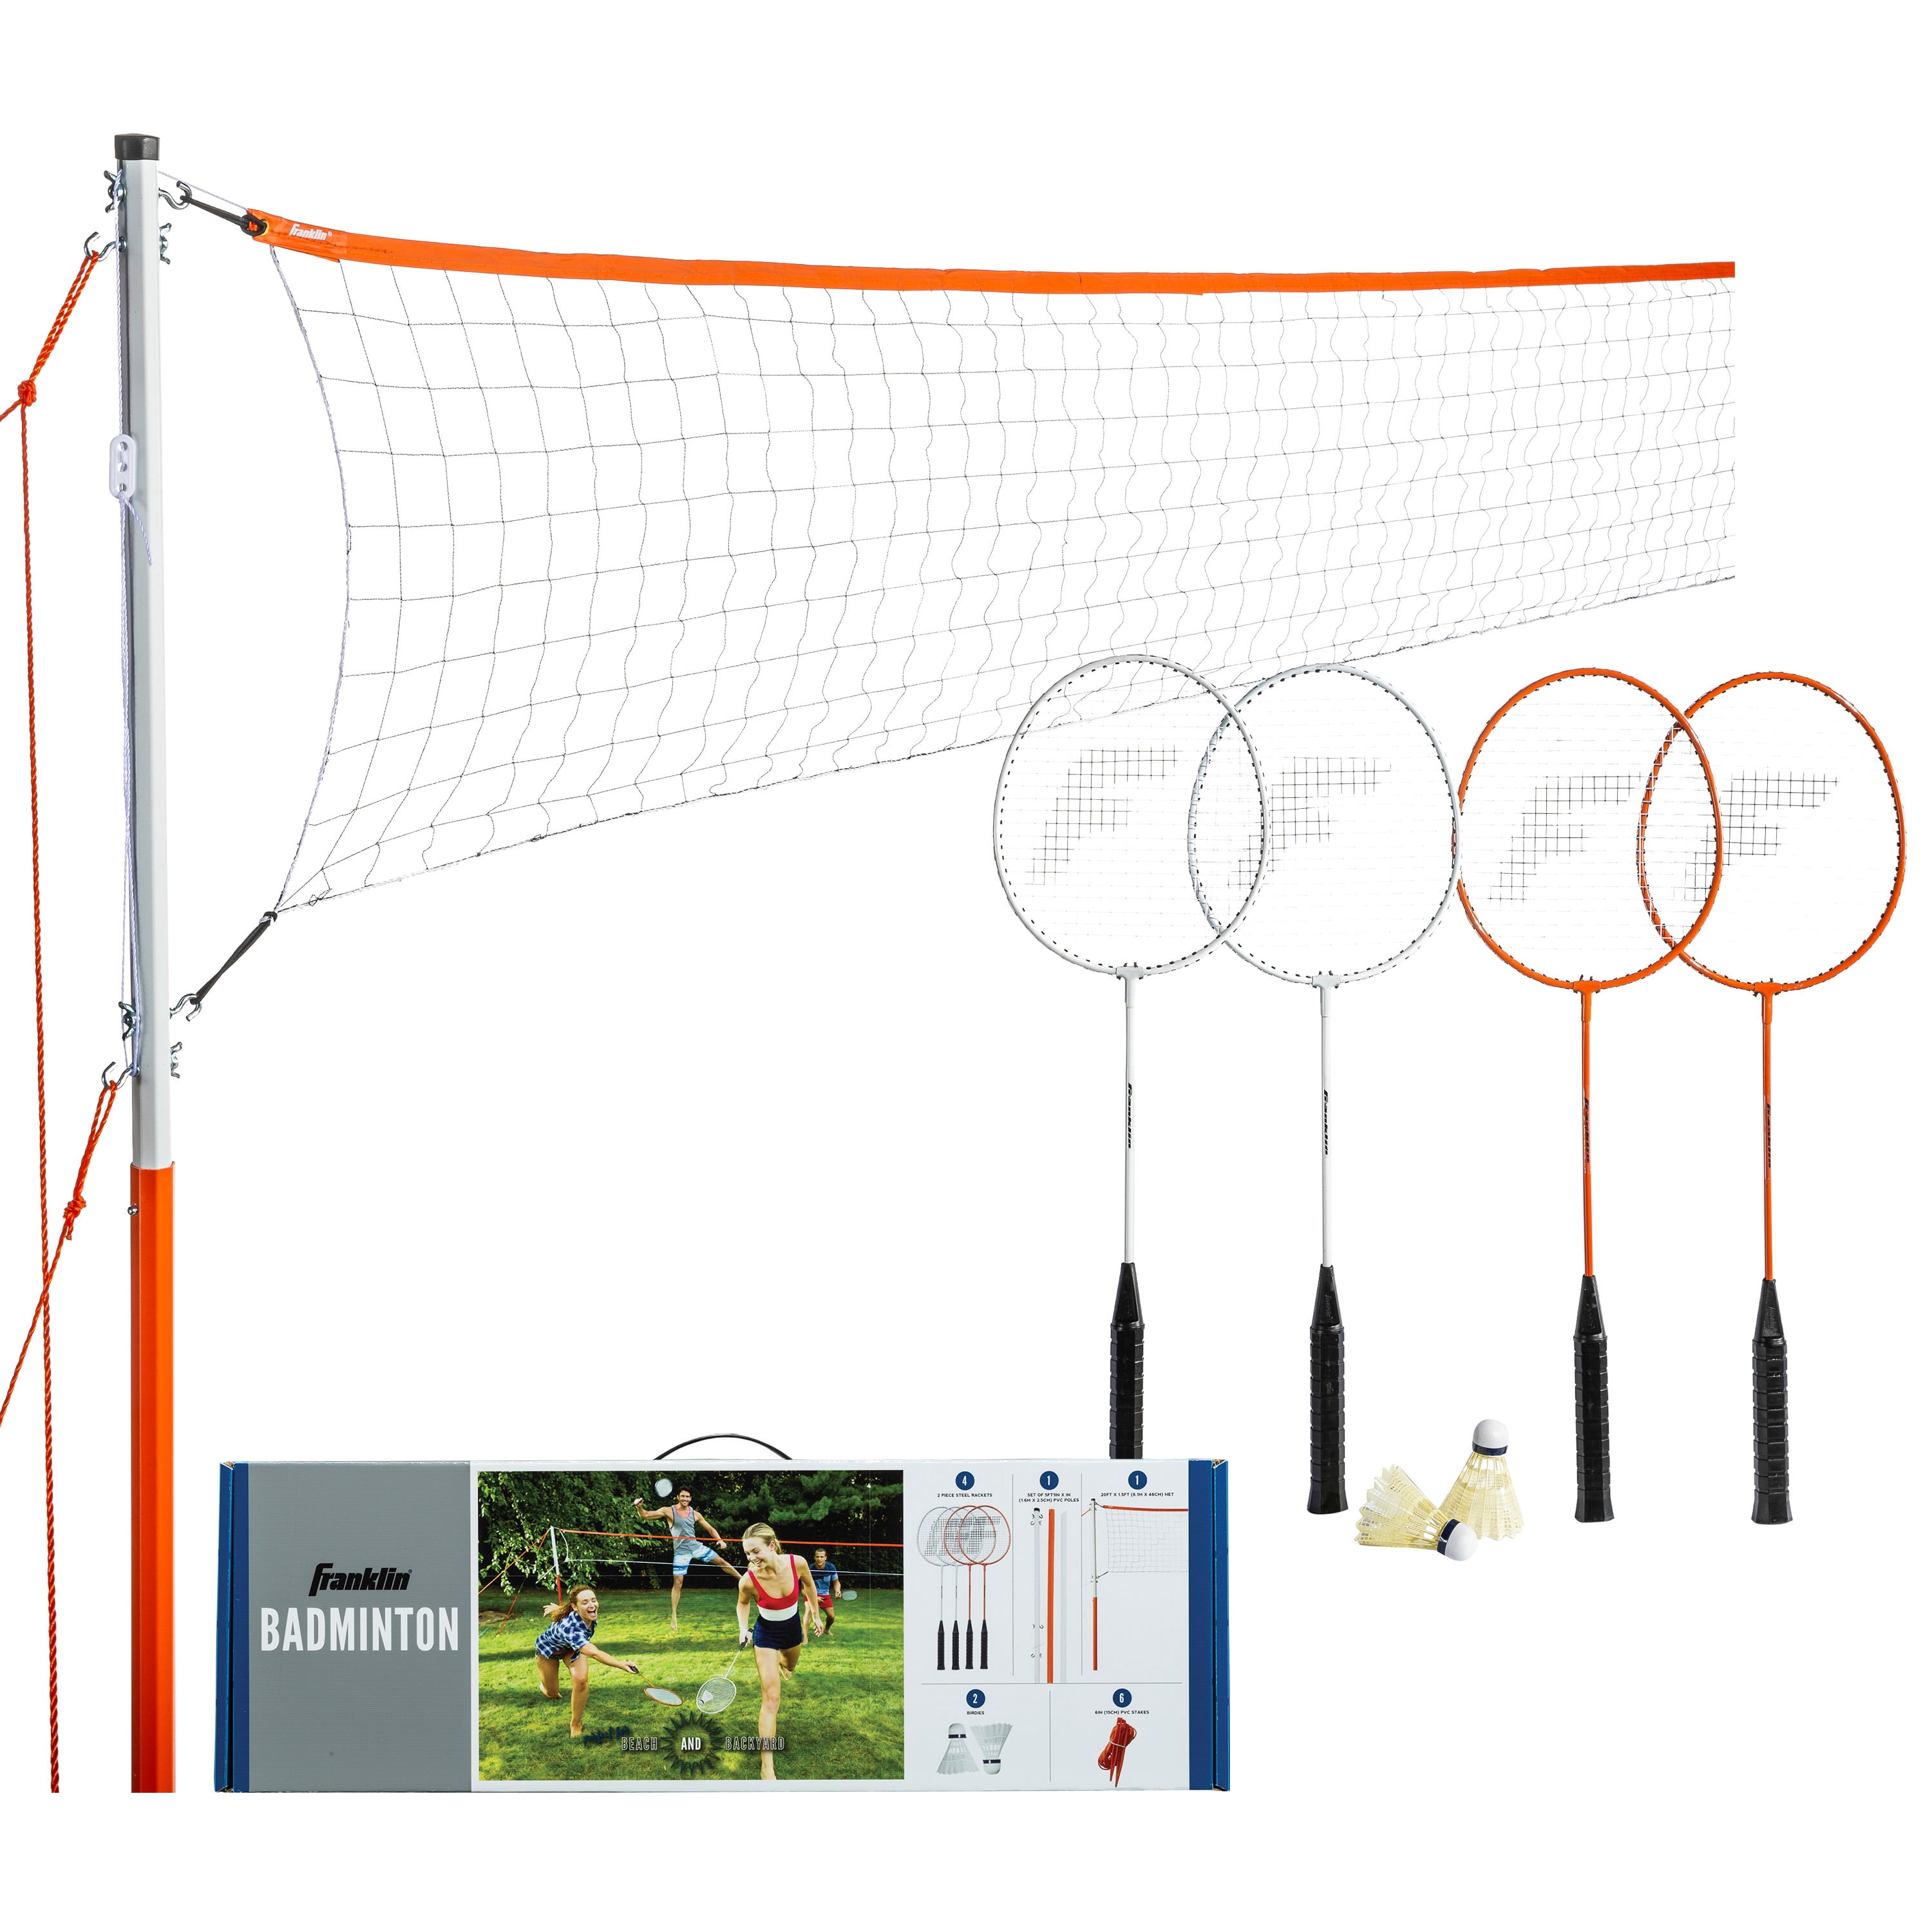 Outdoors Portable Complete Badminton Set With 4 Rackets Net Case for Backyard 